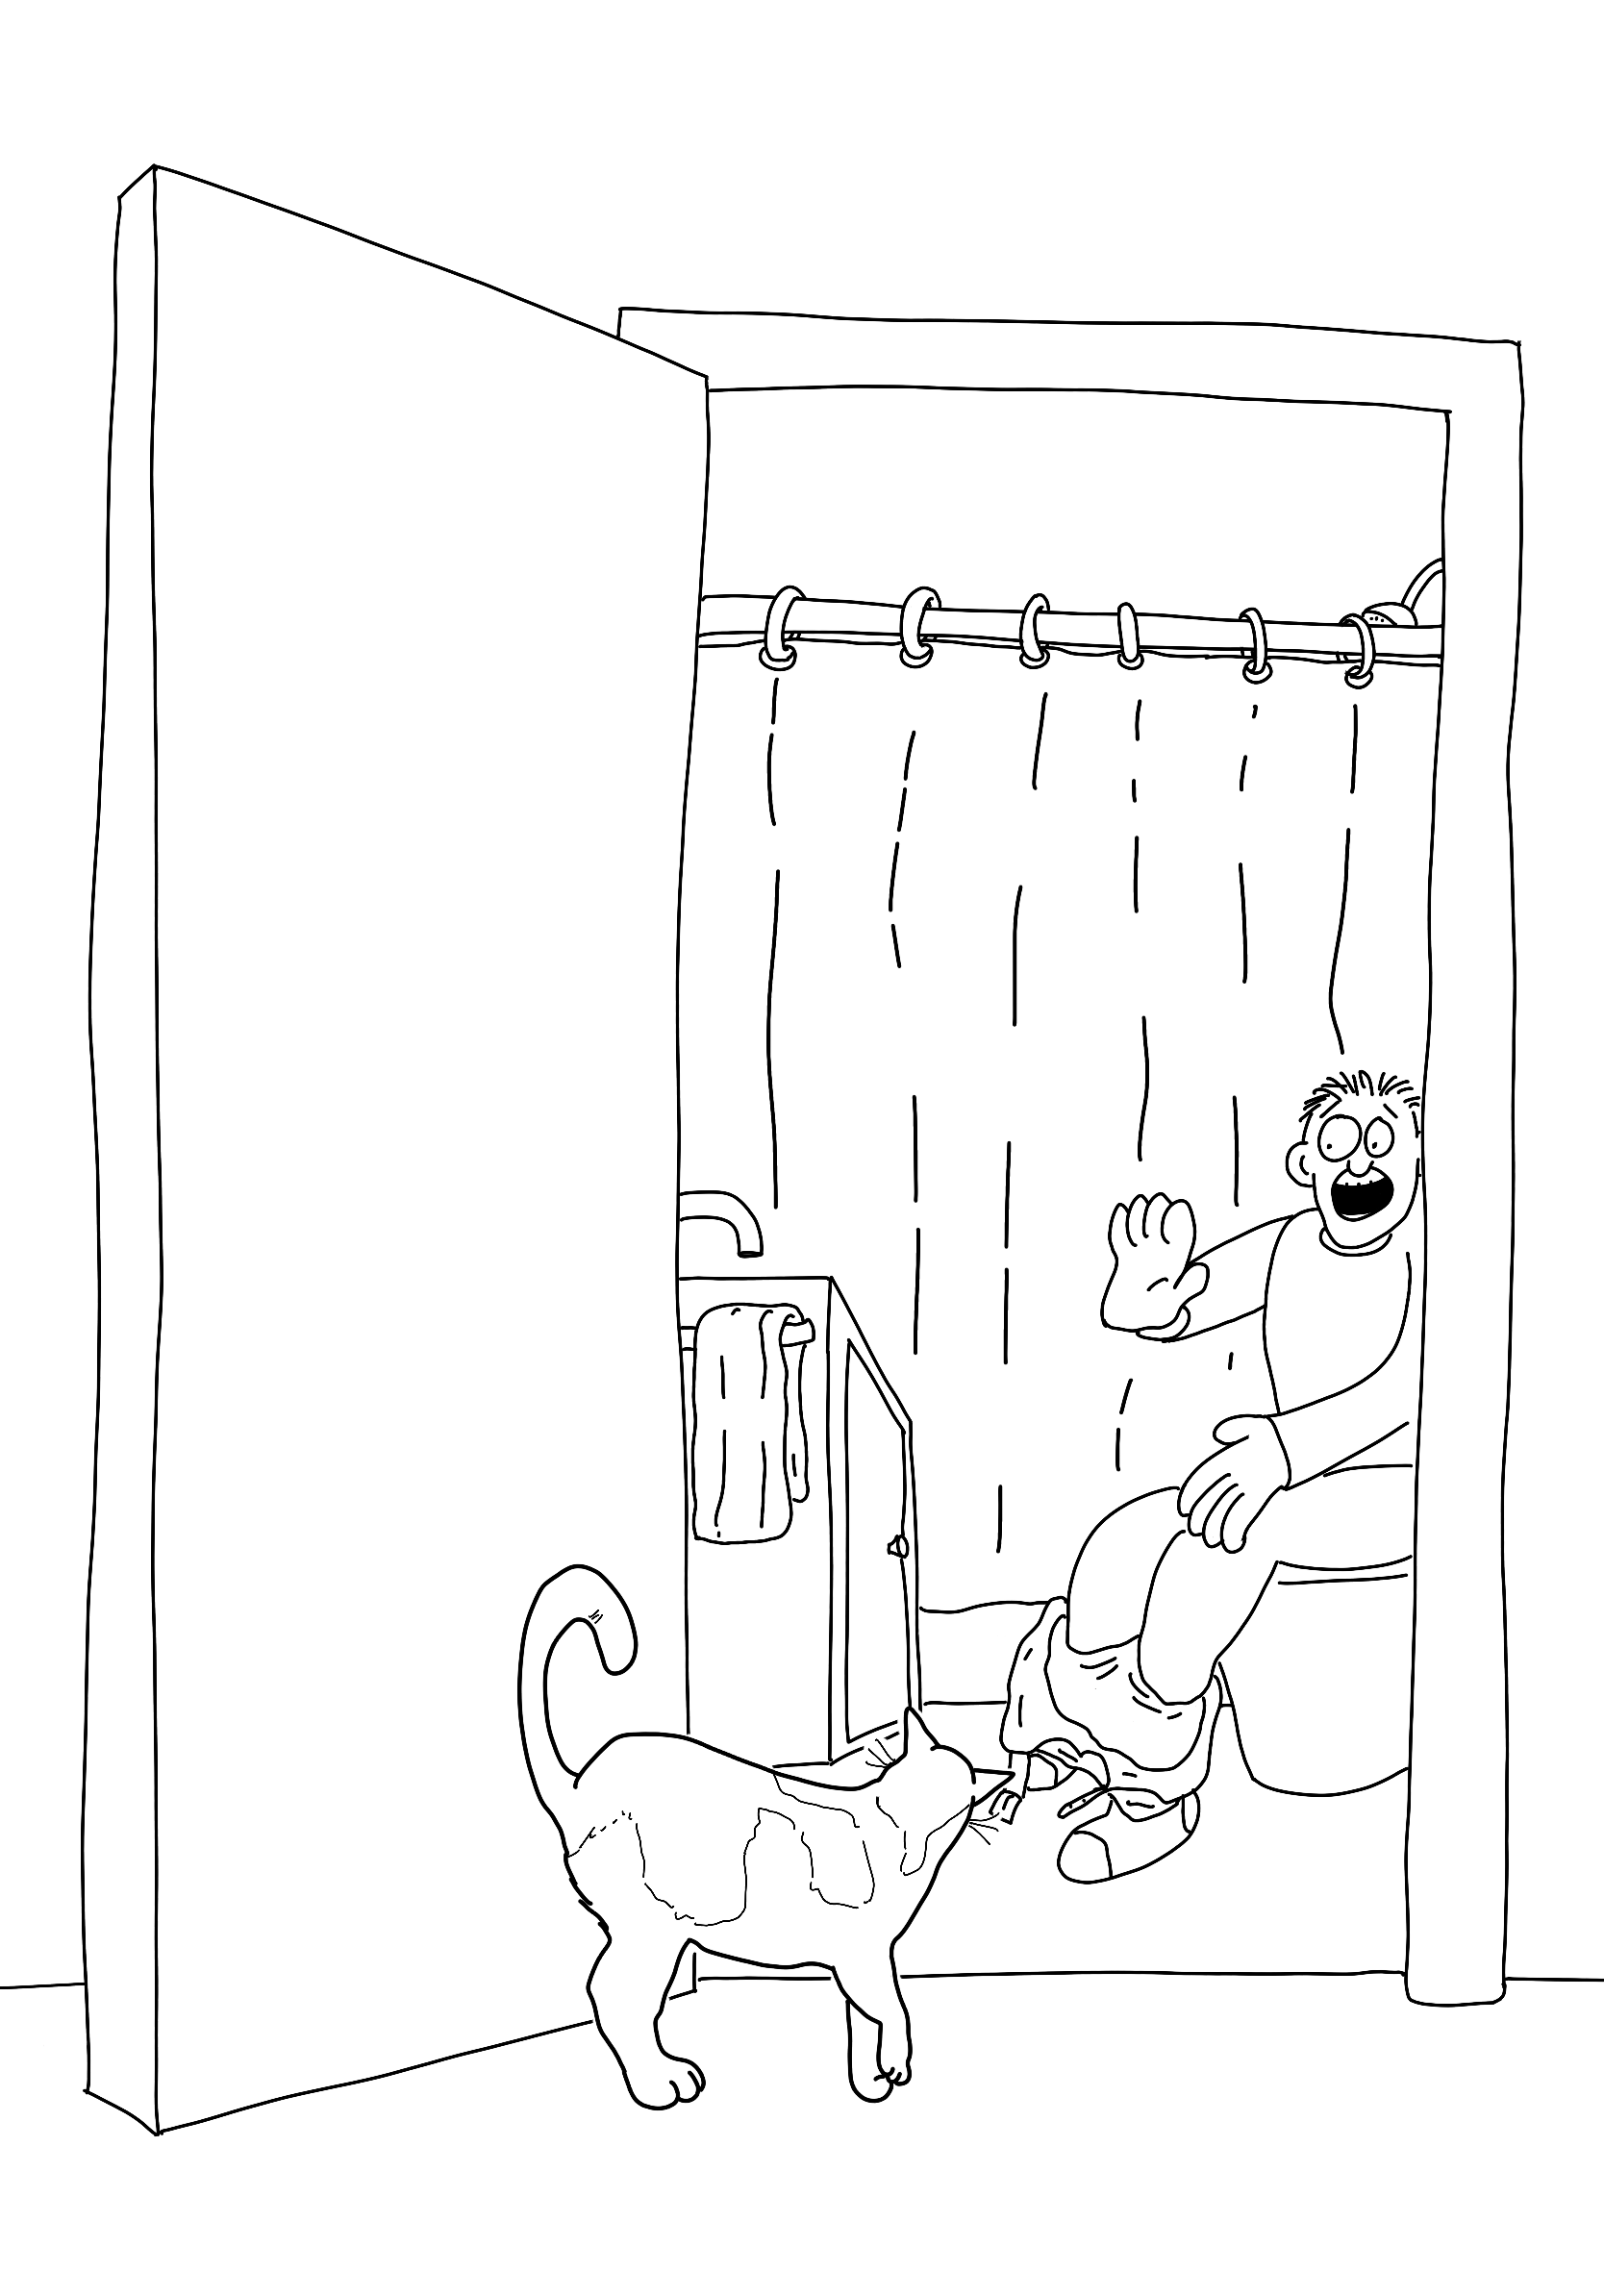 A man is on the toilet in the bathroom with a shocked expression and his hands up towards viewer. A cat is walking towards him having opened the door.